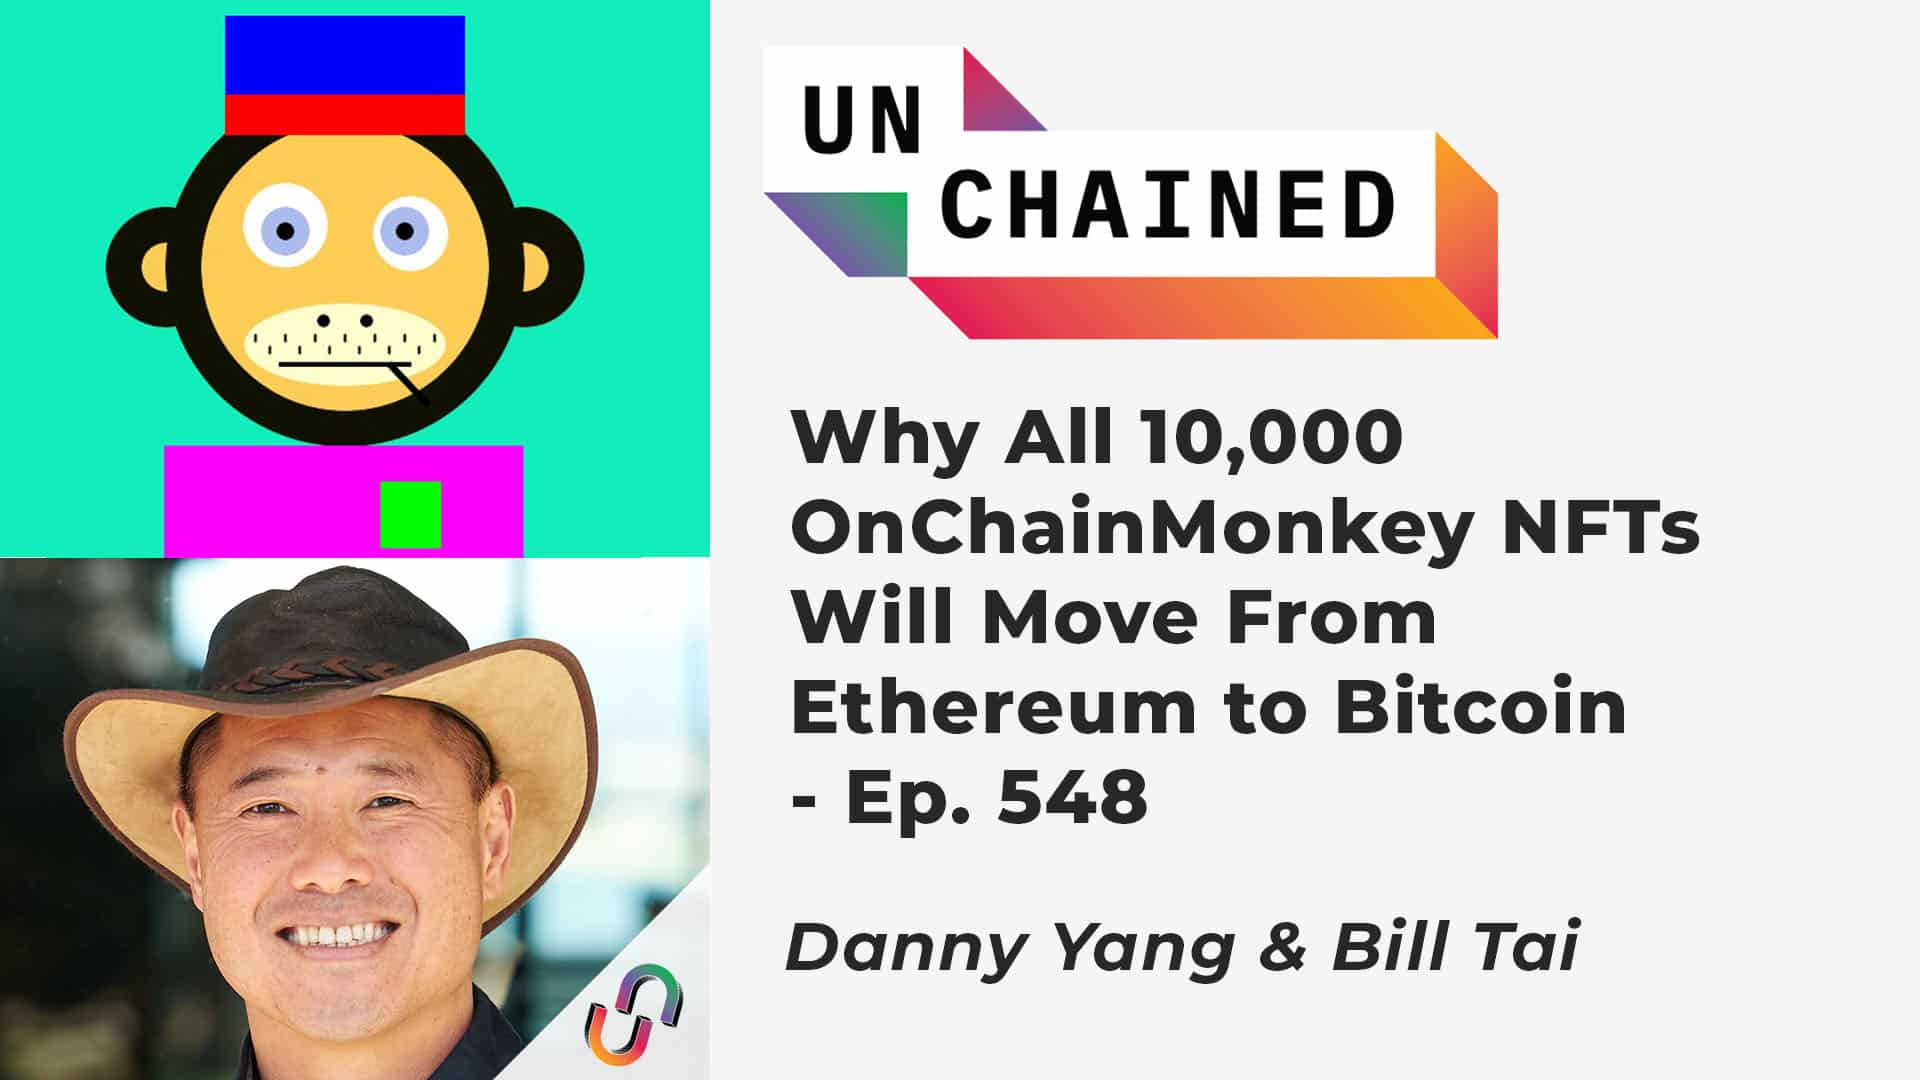 Why All 10,000 OnChainMonkey NFTs Will Move From Ethereum to Bitcoin - Ep. 548